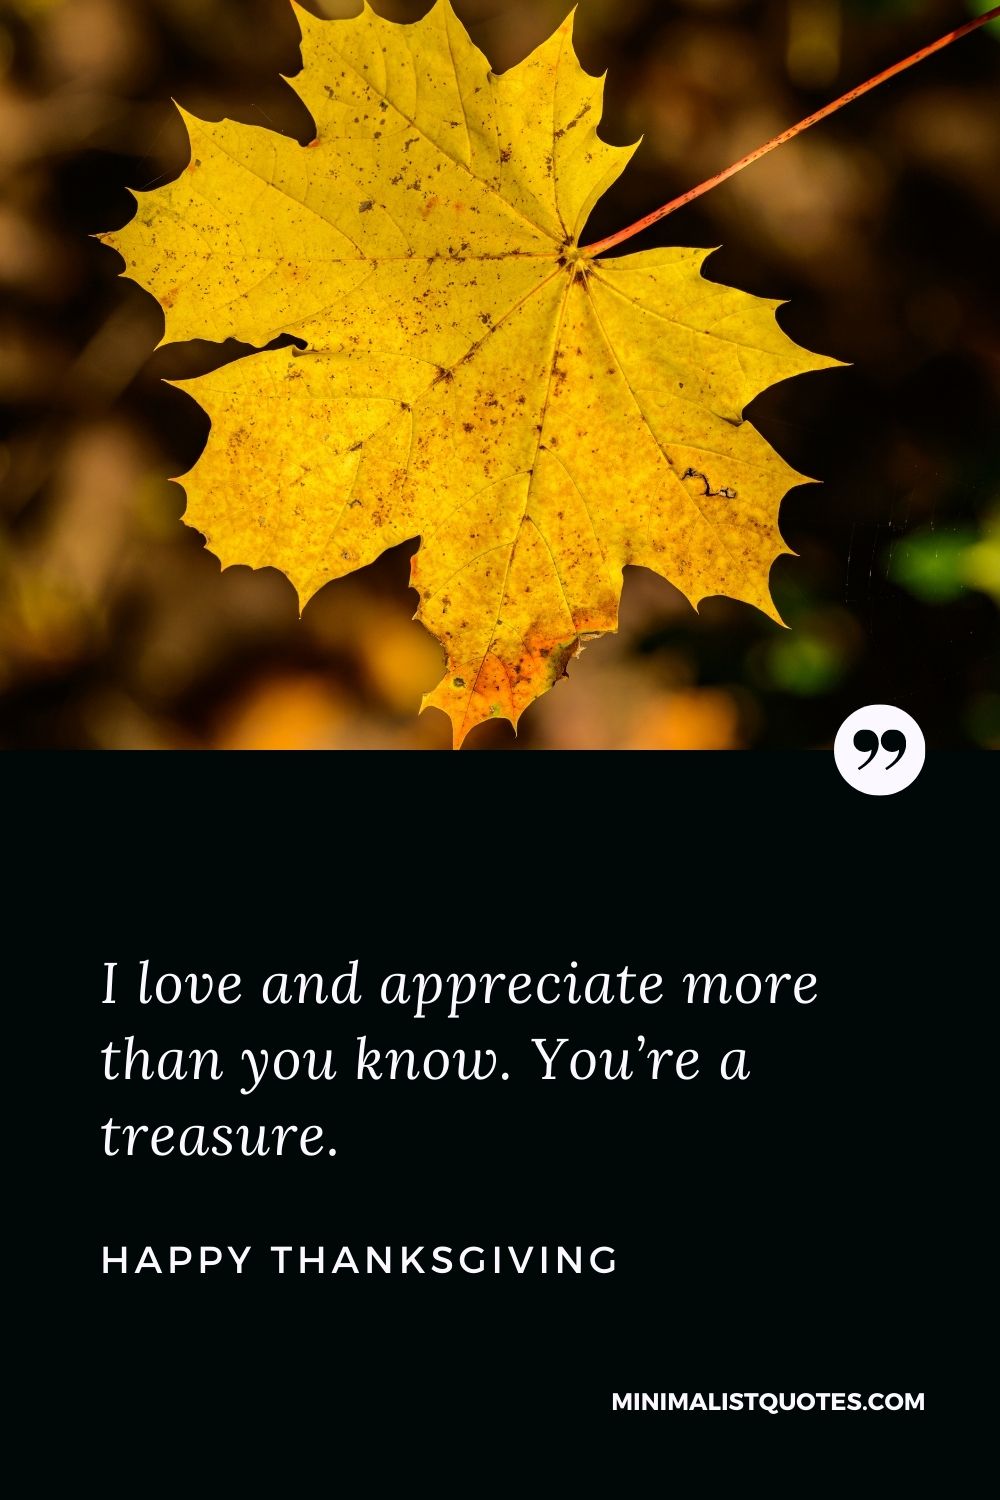 Thanksgiving wish, message & quote with image: I love and appreciate more than you know. You’re a treasure. Happy Thanksgiving!